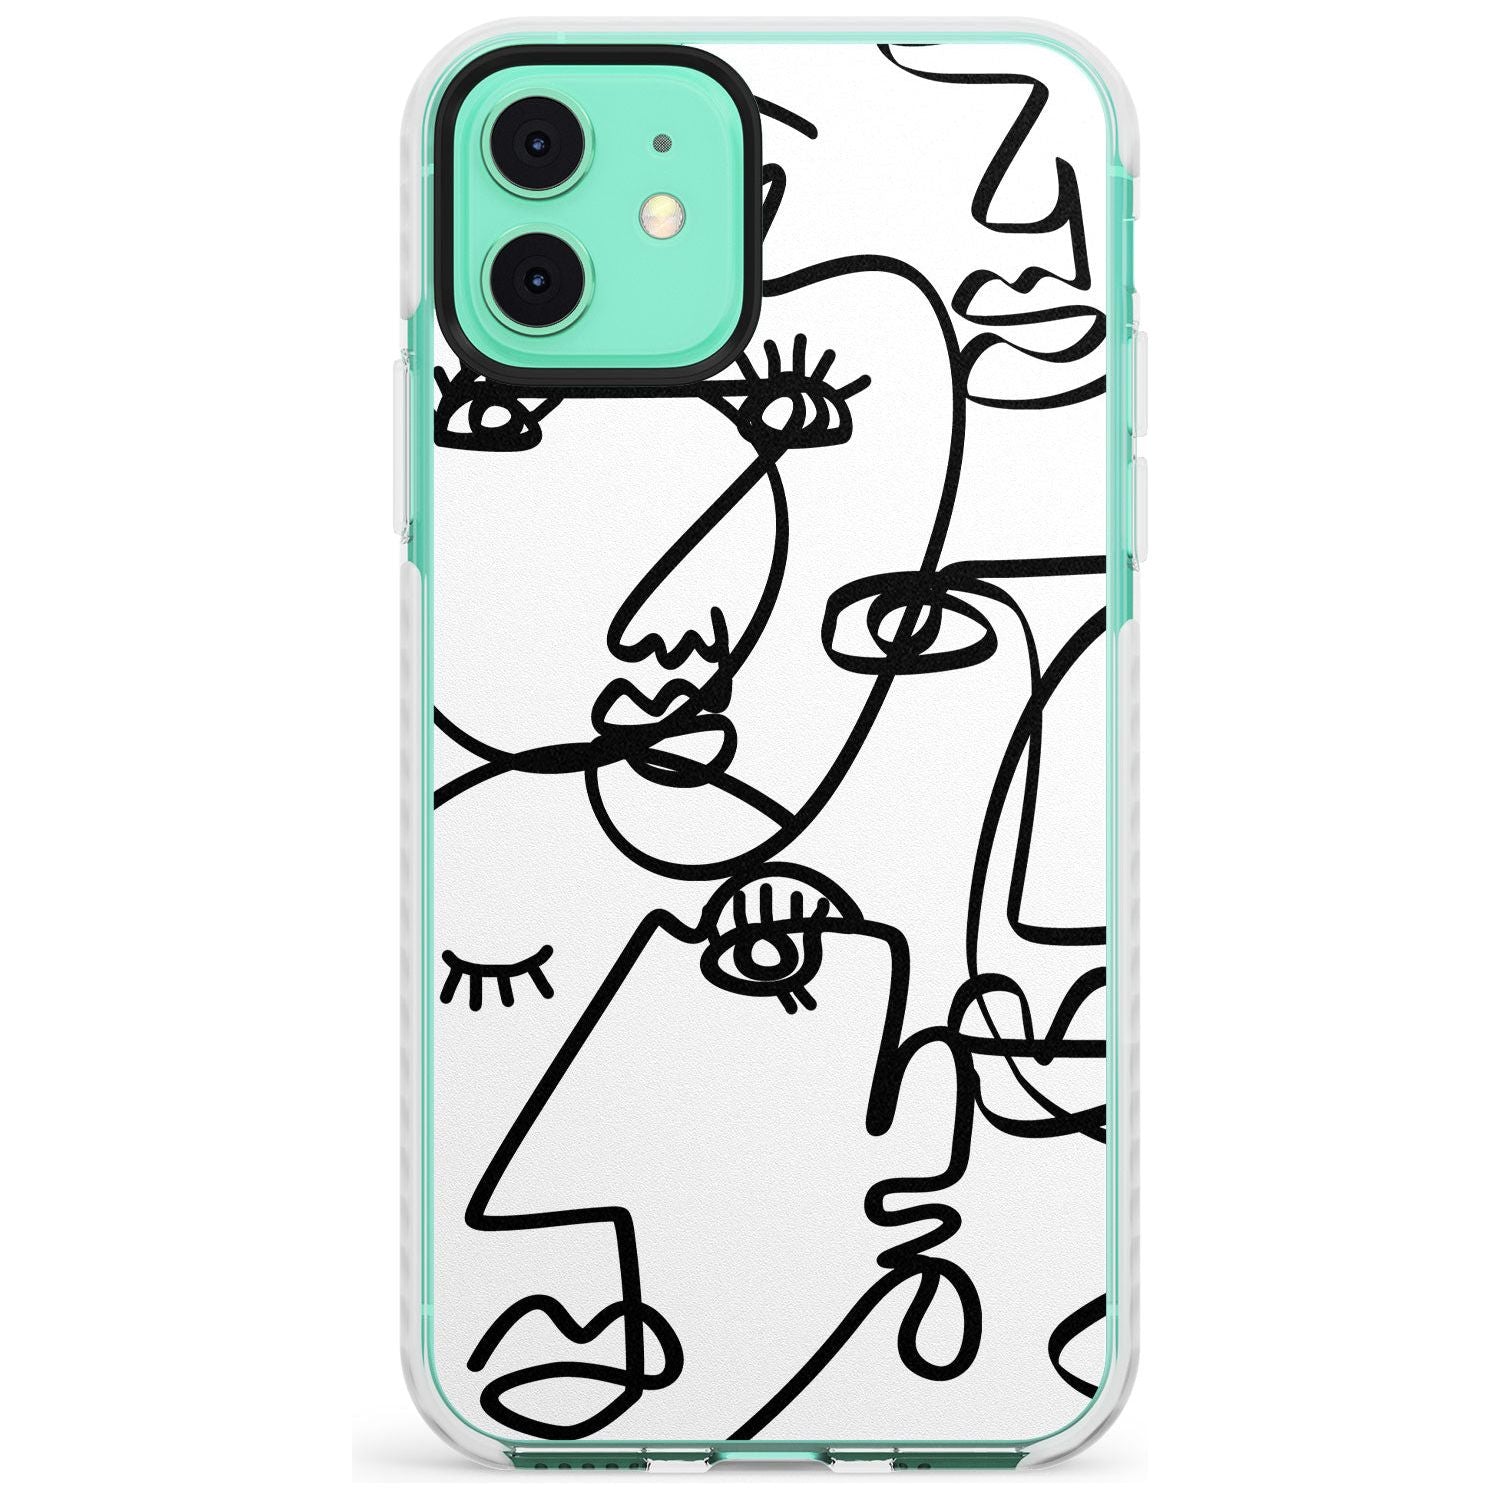 Continuous Line Faces: Black on White Slim TPU Phone Case for iPhone 11